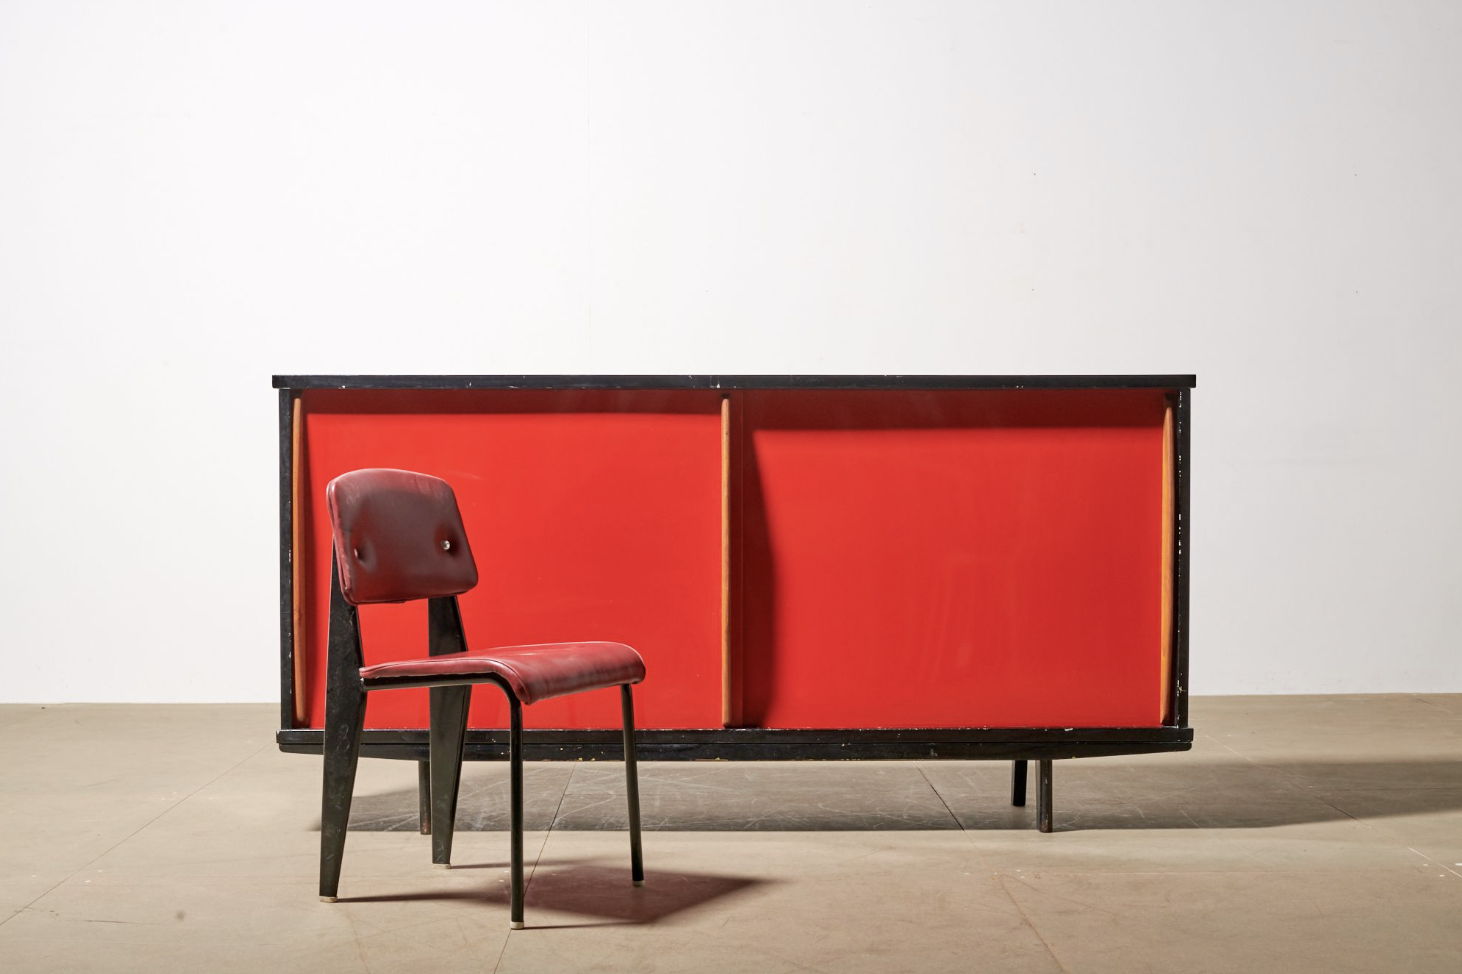 Sideboard, 1952 by Jean Prouvé at Galerie Downtown-LAFFANOUR. Image courtesy of Galerie Downtown-LAFFANOUR